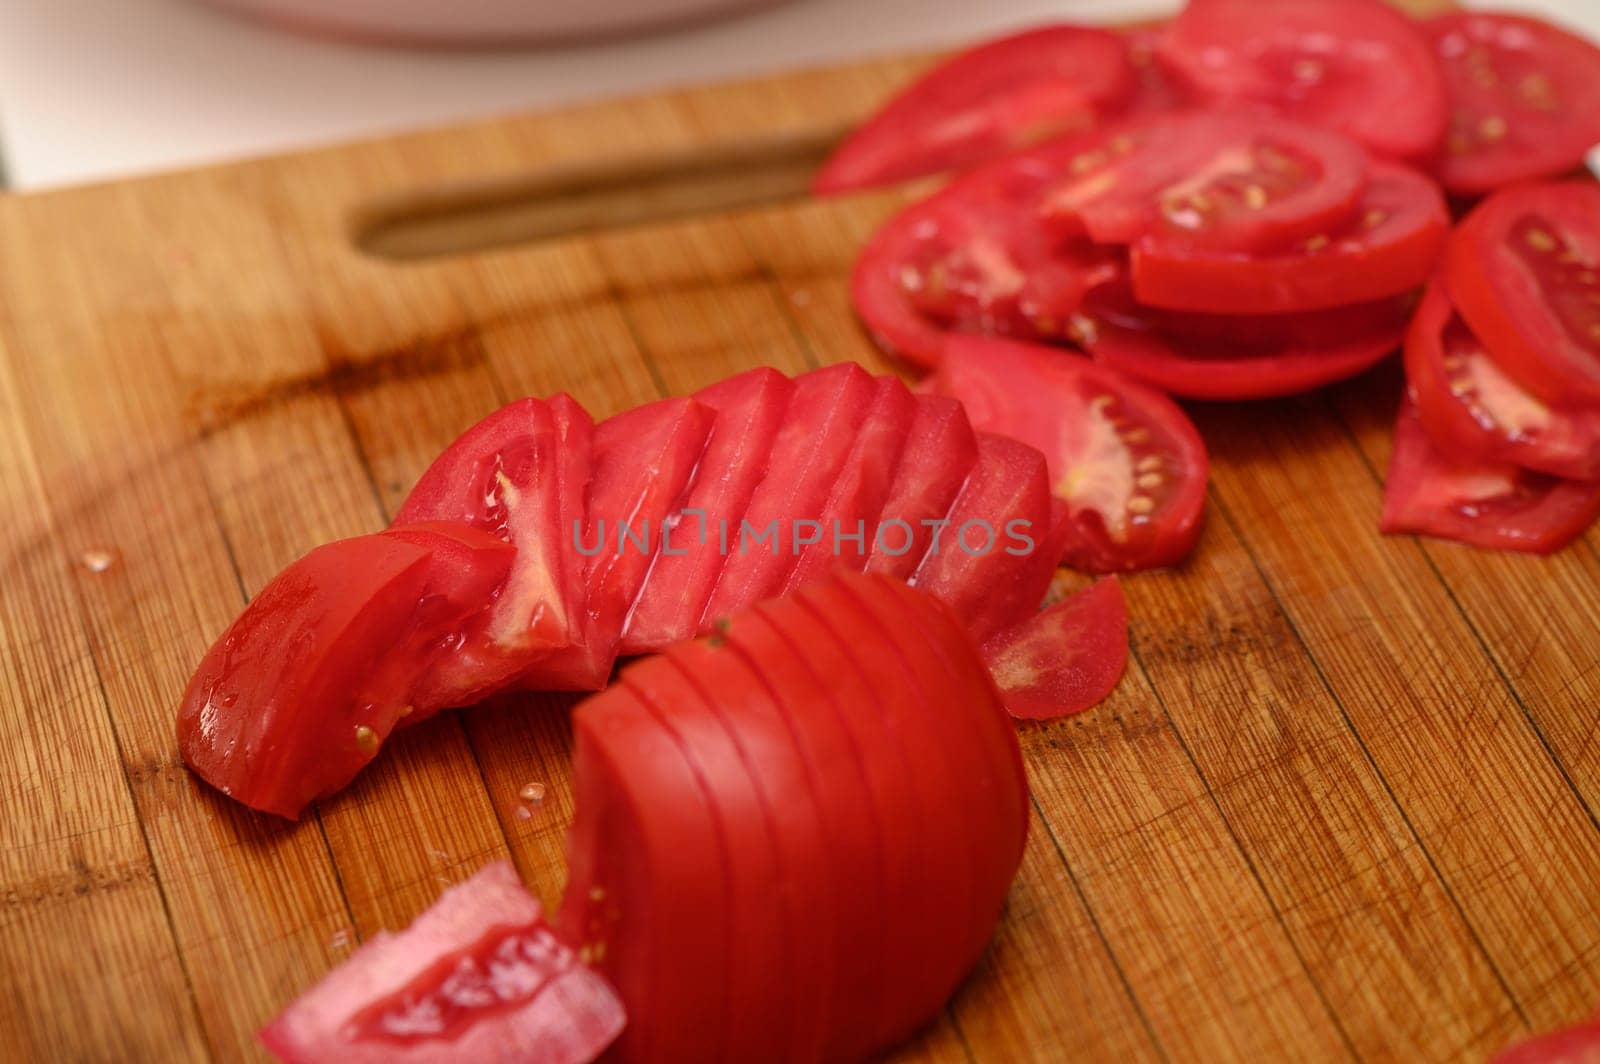 woman cutting tomato on kitchen board 8 by Mixa74